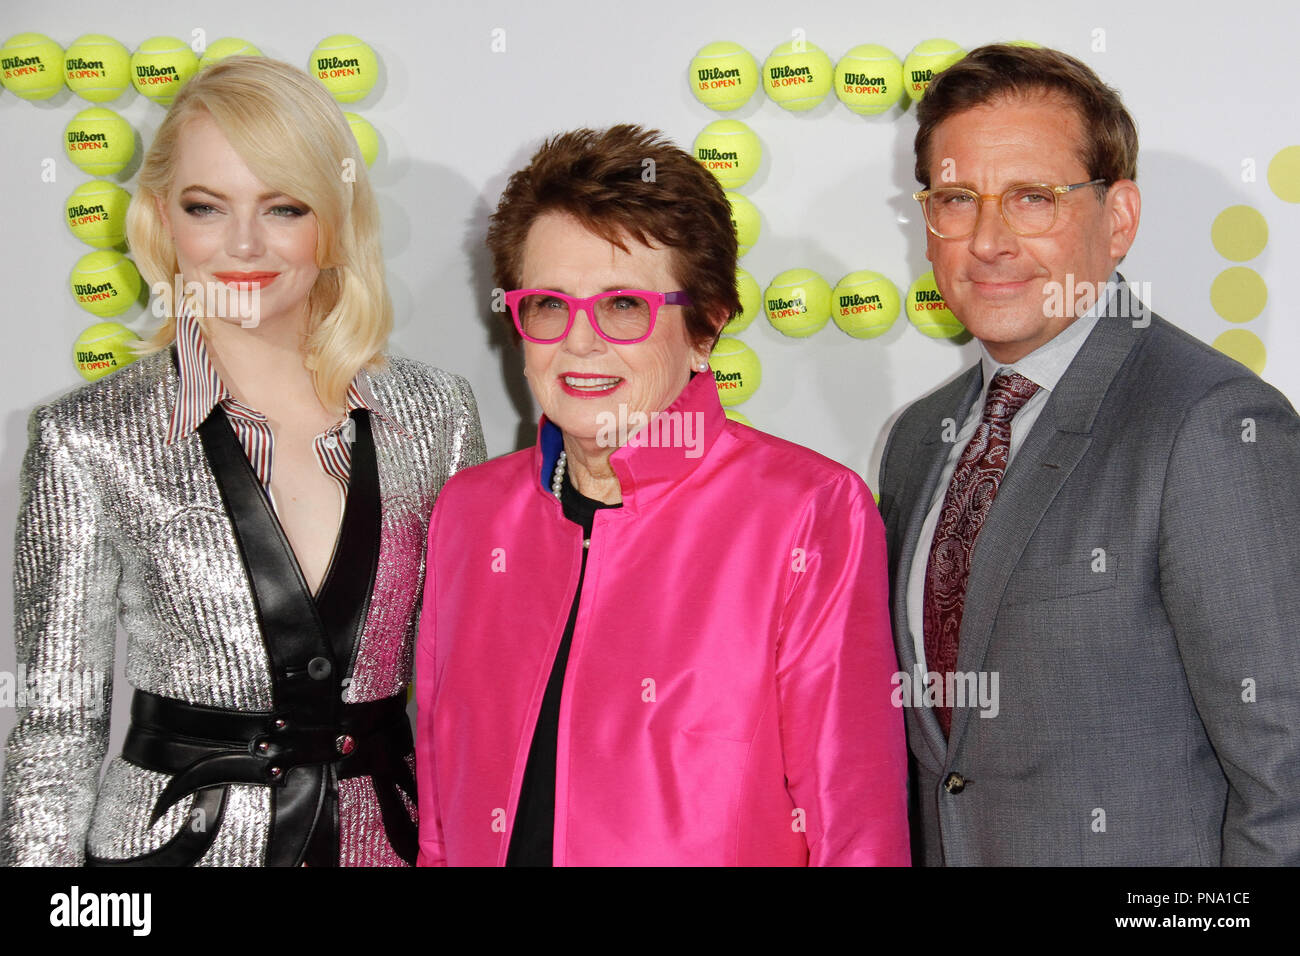 Emma Stone, Billie Jean King, Steve Carell at the Premiere of Fox Searchlight Pictures' 'Battle of the Sexes' held at the Regency Village Theater in Westwood, CA, September 16, 2017. Photo by Joseph Martinez / PictureLux Stock Photo